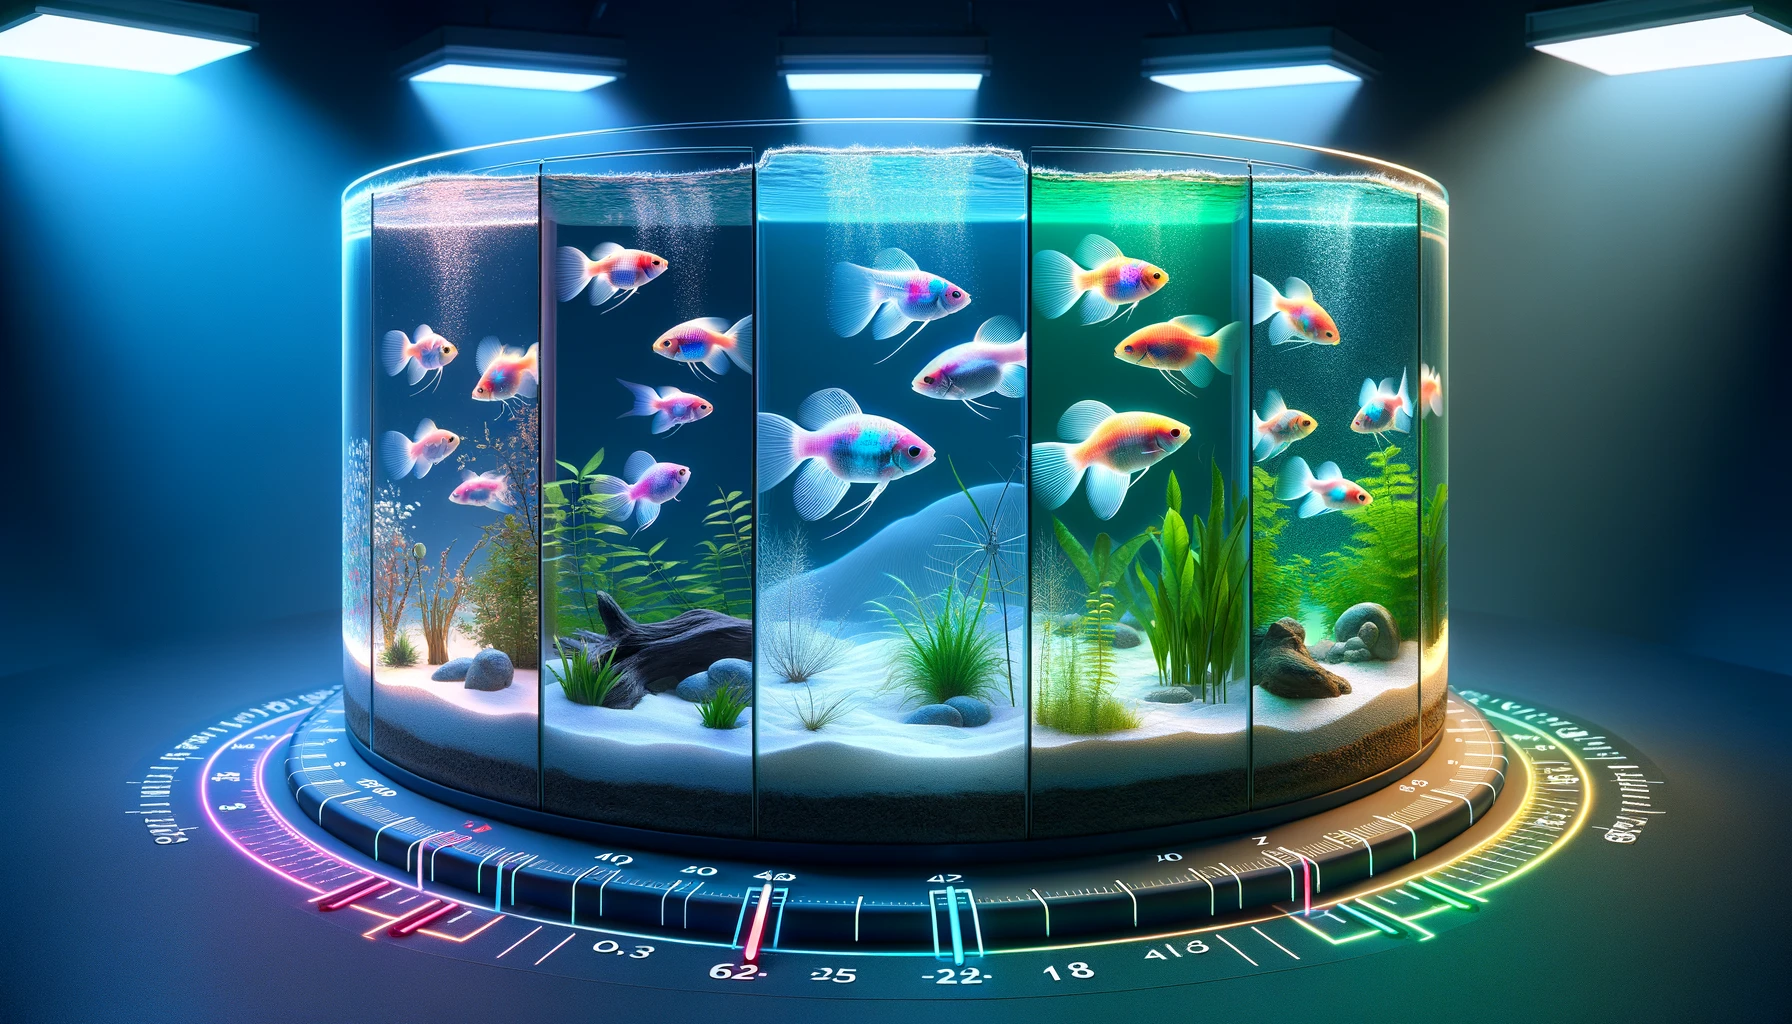 influence of season and air temperature on the breeding of GloFish in an aquarium. The scene is divided into four sect